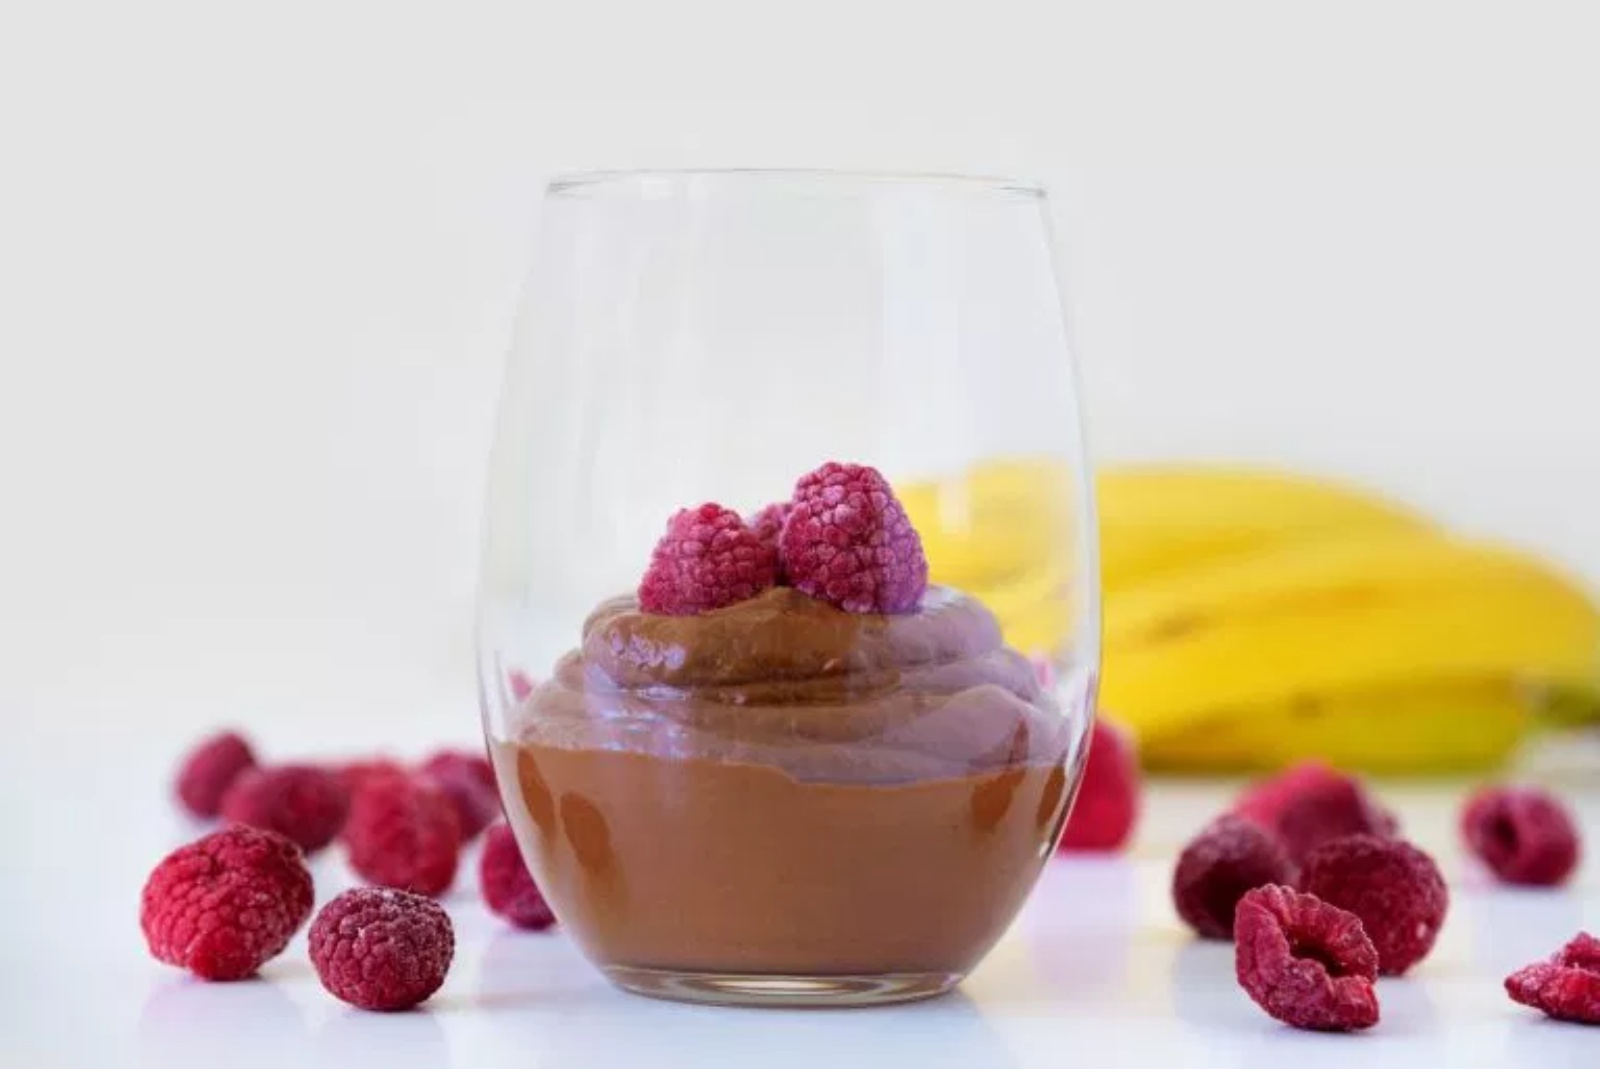 chocolate-banana-avocado-pudding.jpgw1600ssl1 10 of Our Top Gluten Free Plant-Based Recipes From October 2022!